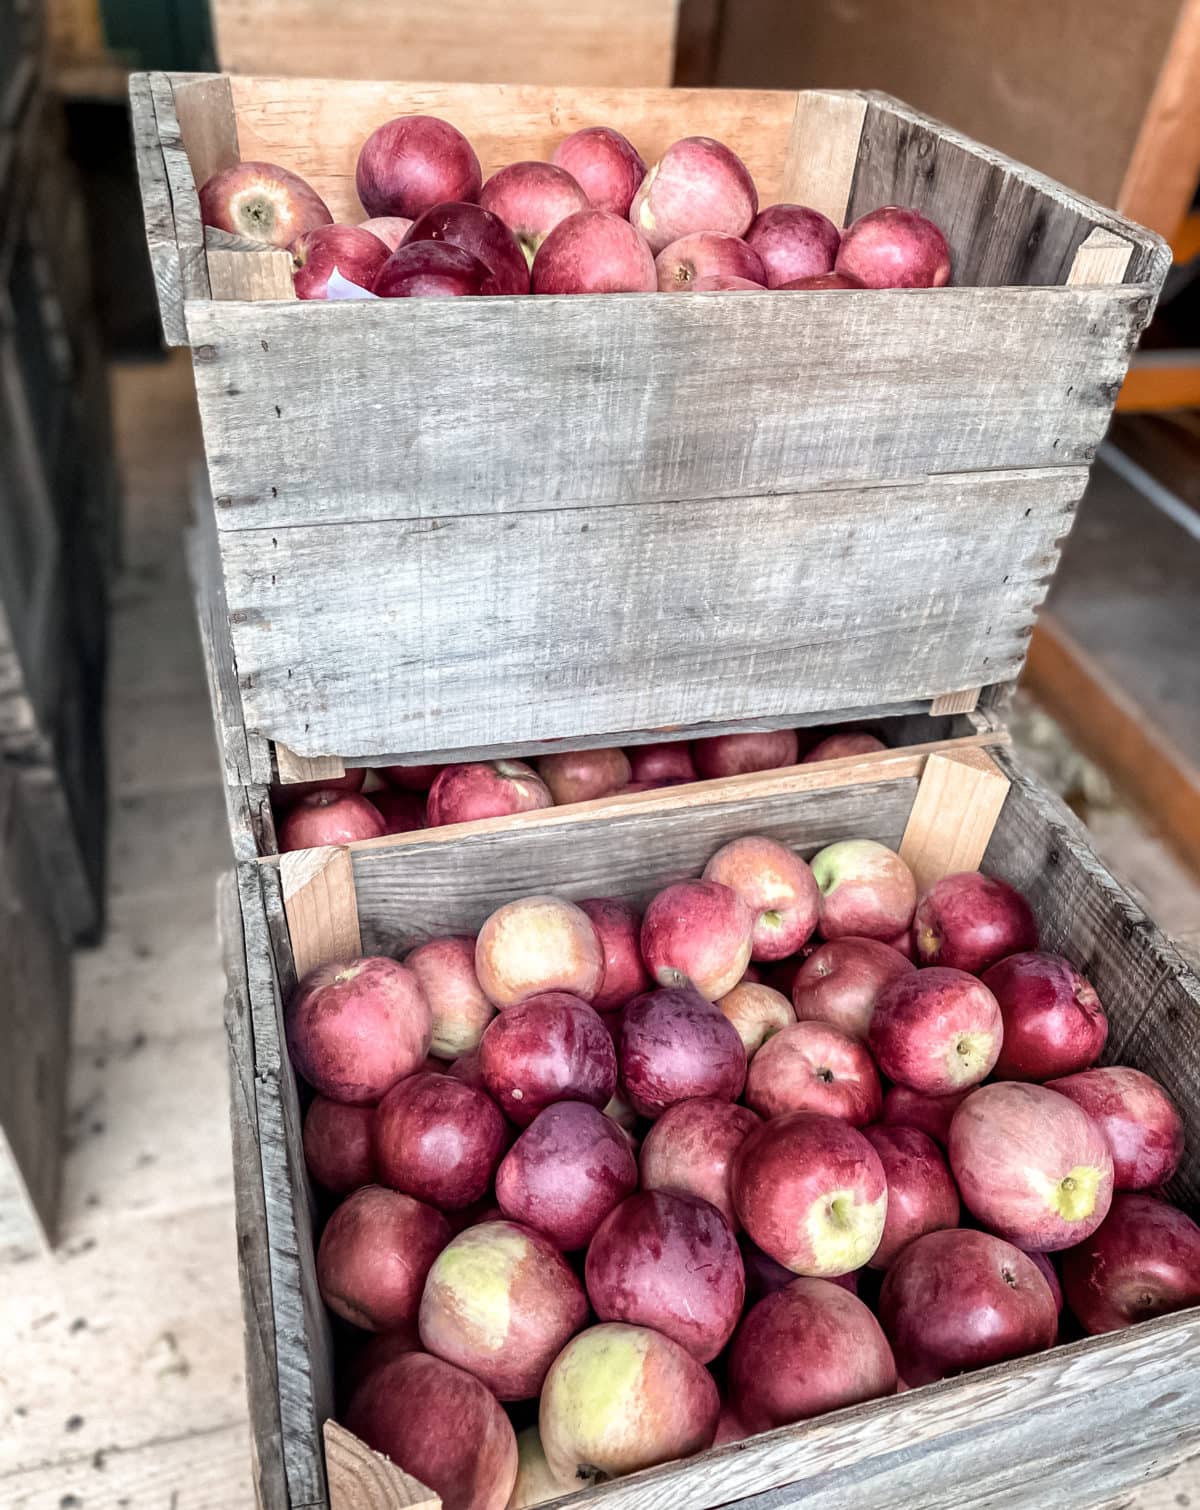 Wood crates of red apples